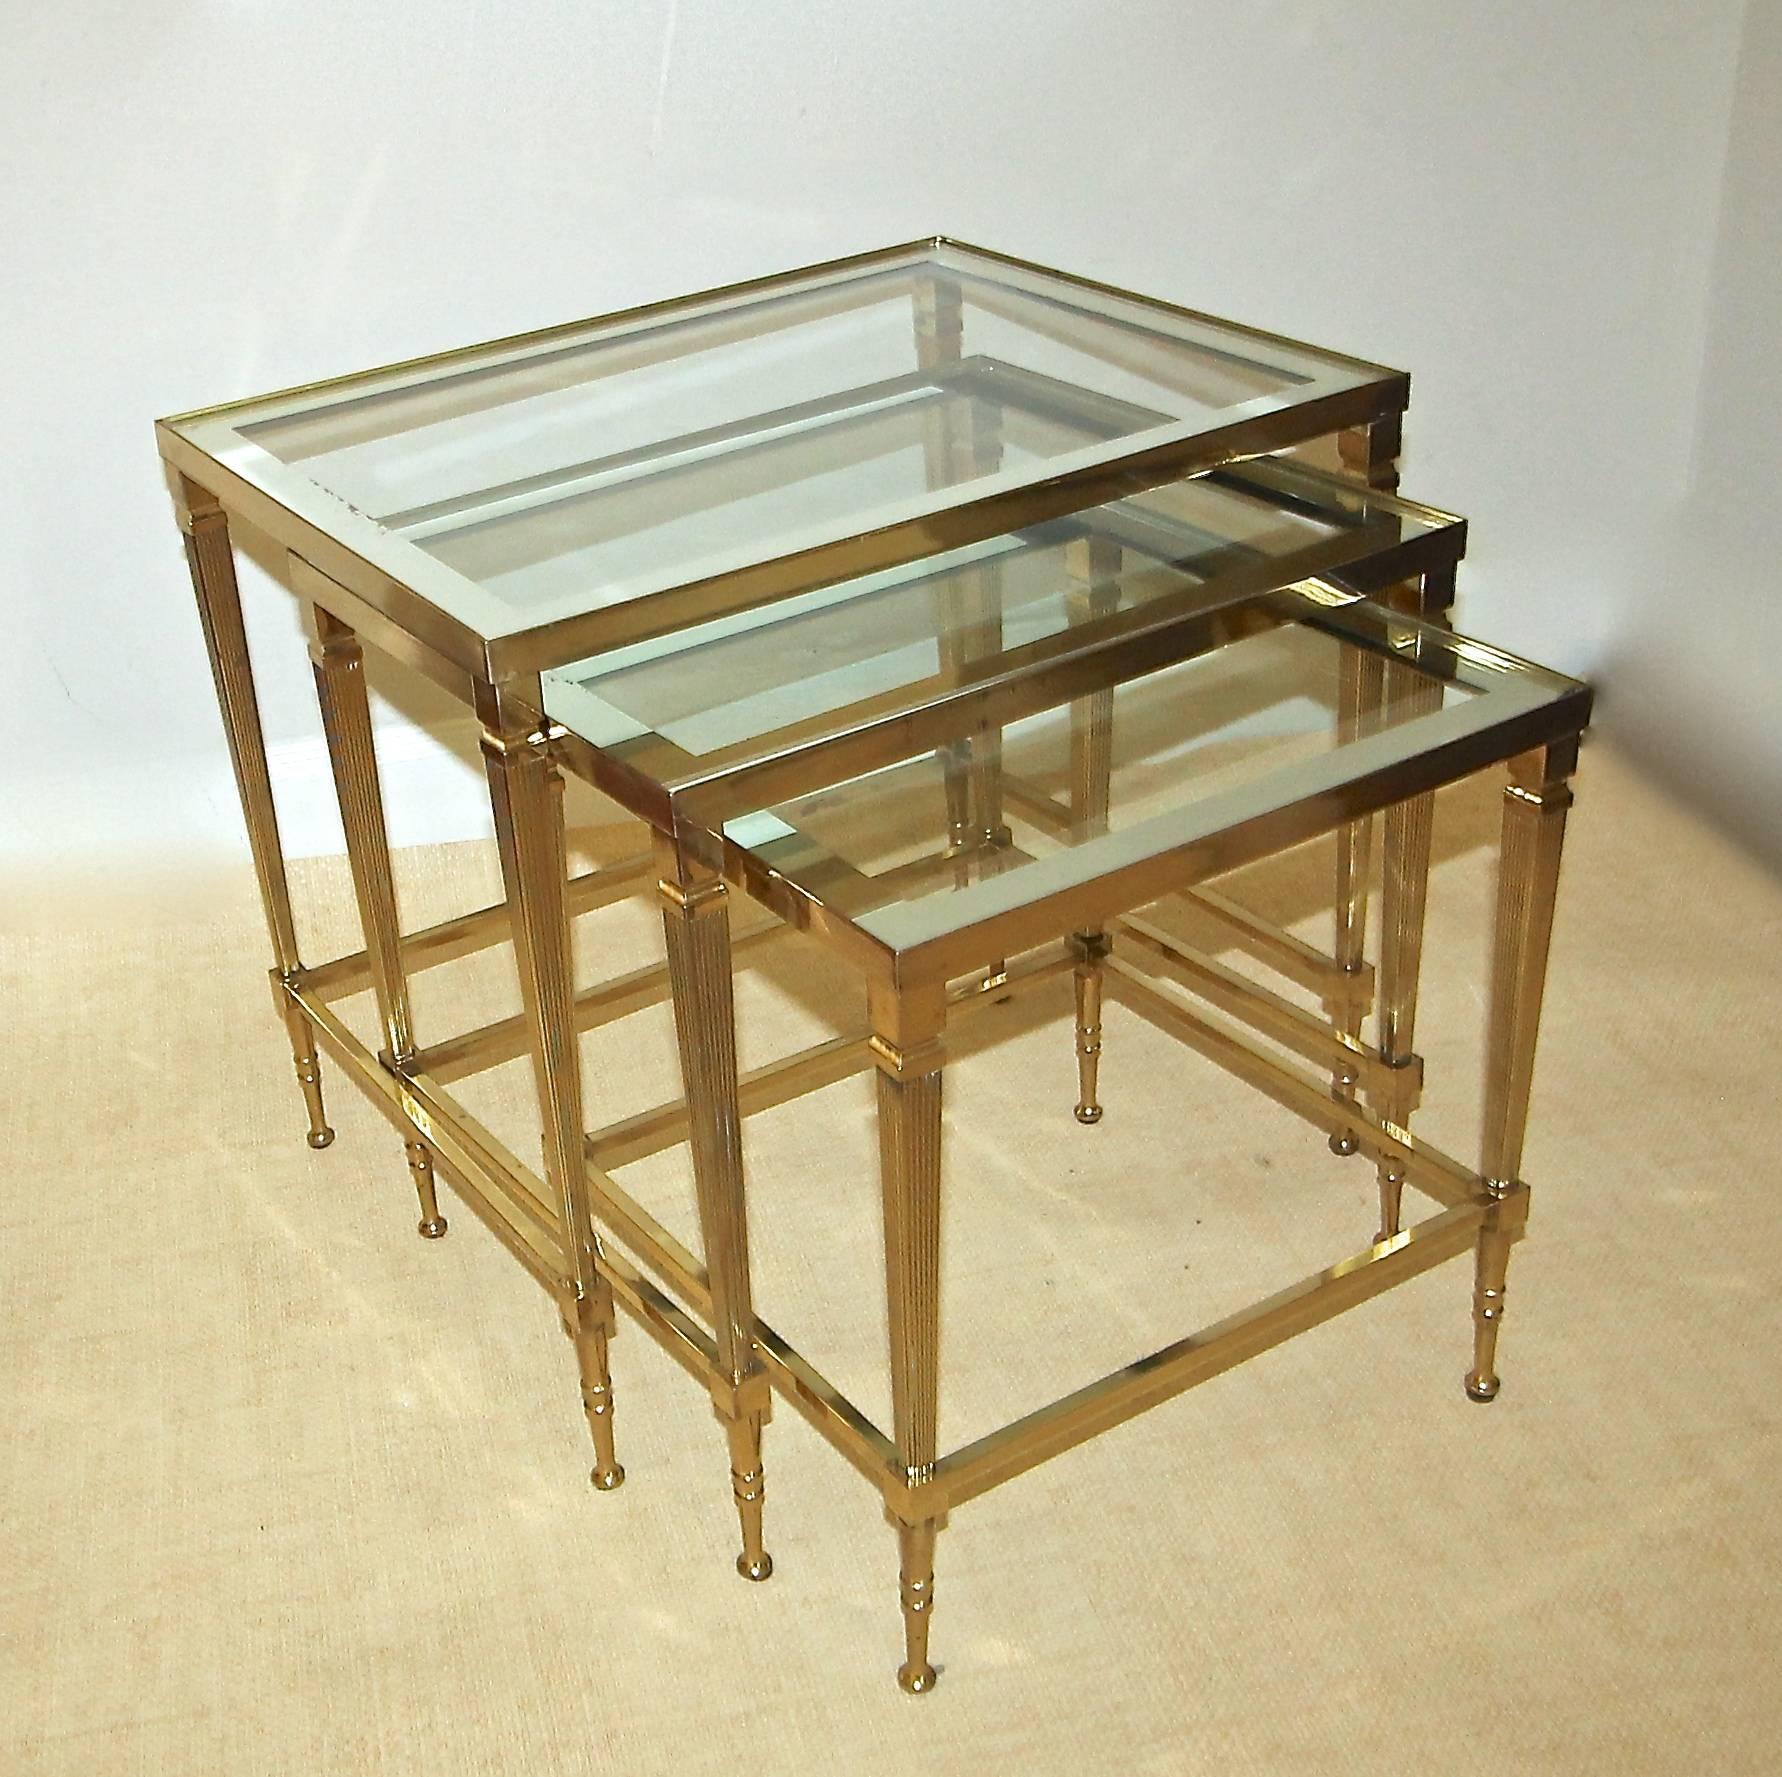 Trio of Maison Jansen brass nesting tables with mirrored edge glass tops.
Size of each table:
20.25" L X 15.25" W X 18.25" H.
17.25" L X 14.25" W X 17" H.
14.5" L X 13" W X 15.5" H.